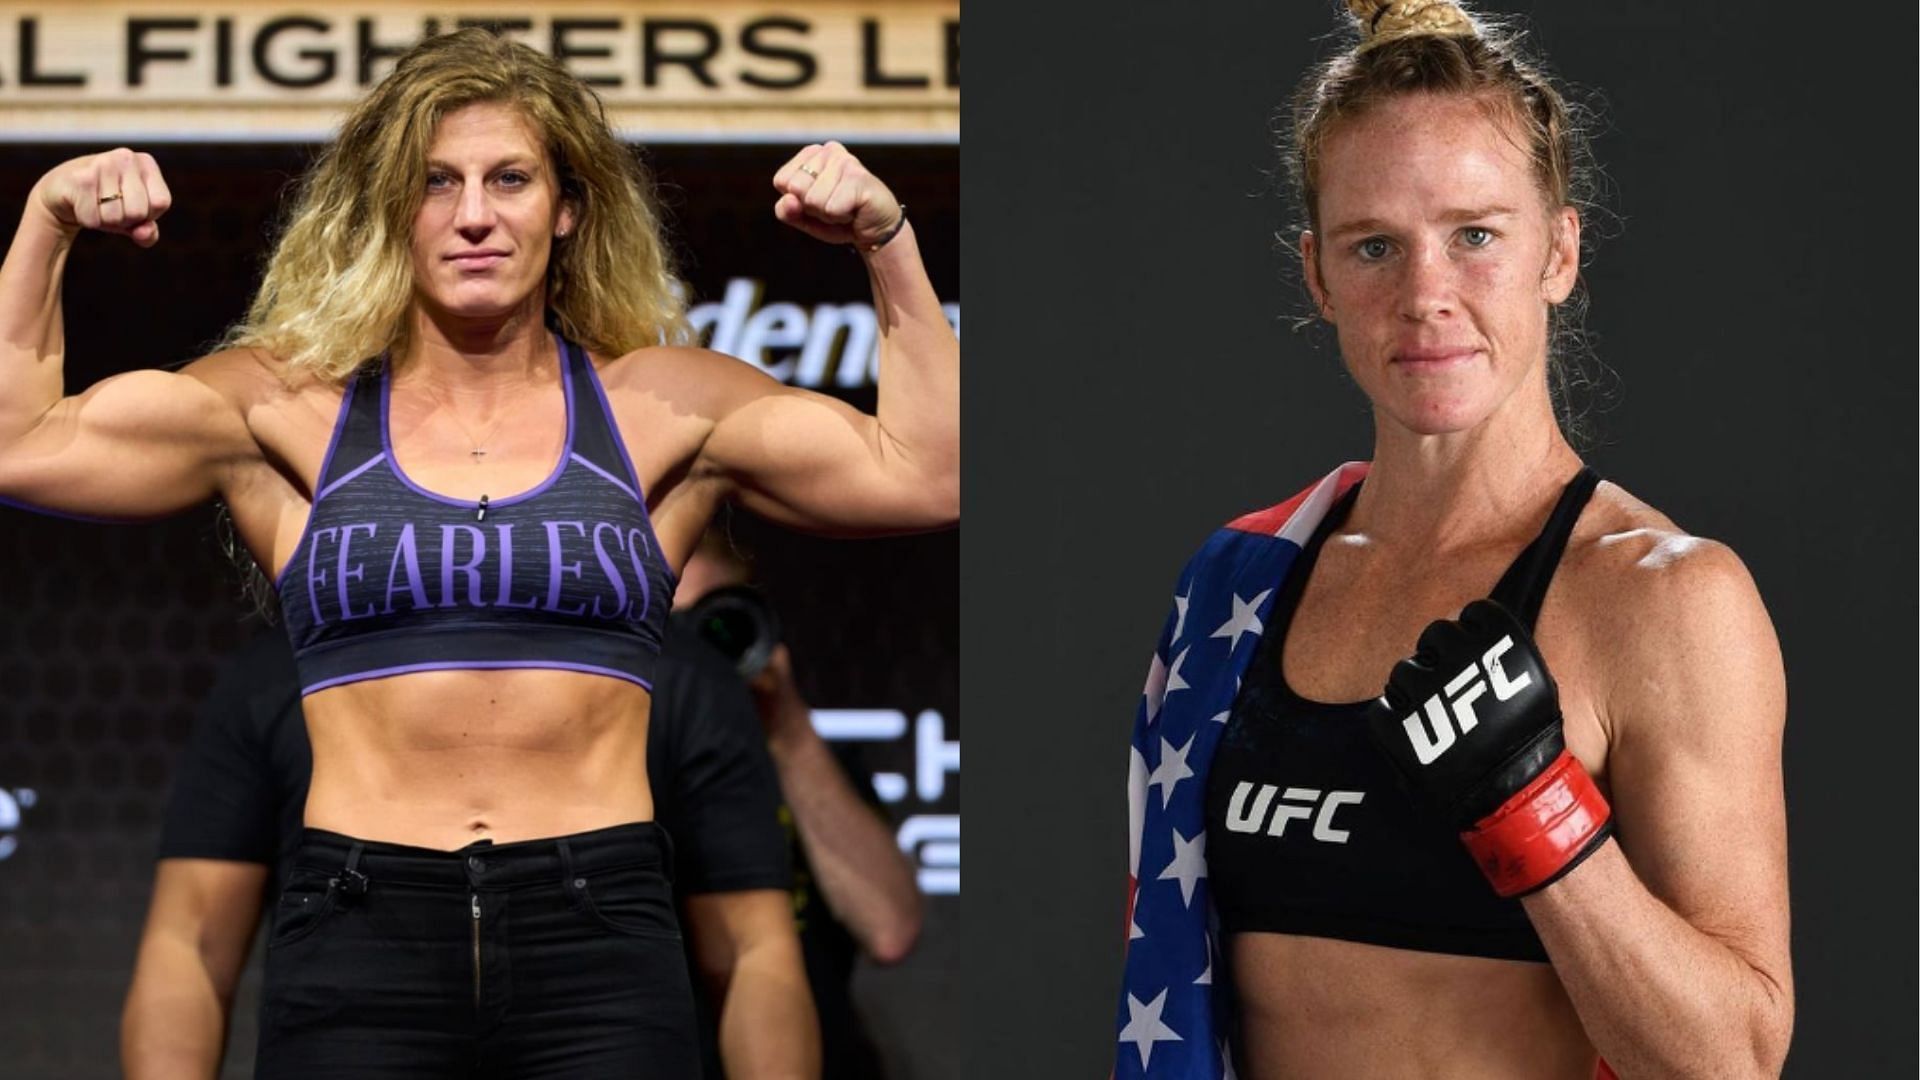 Kayla Harrison (left) opens as betting favorite over Holly Holm (right) [Images courtesy of @kaylaharrisonofficial &amp; @hollyholm on Instagram]